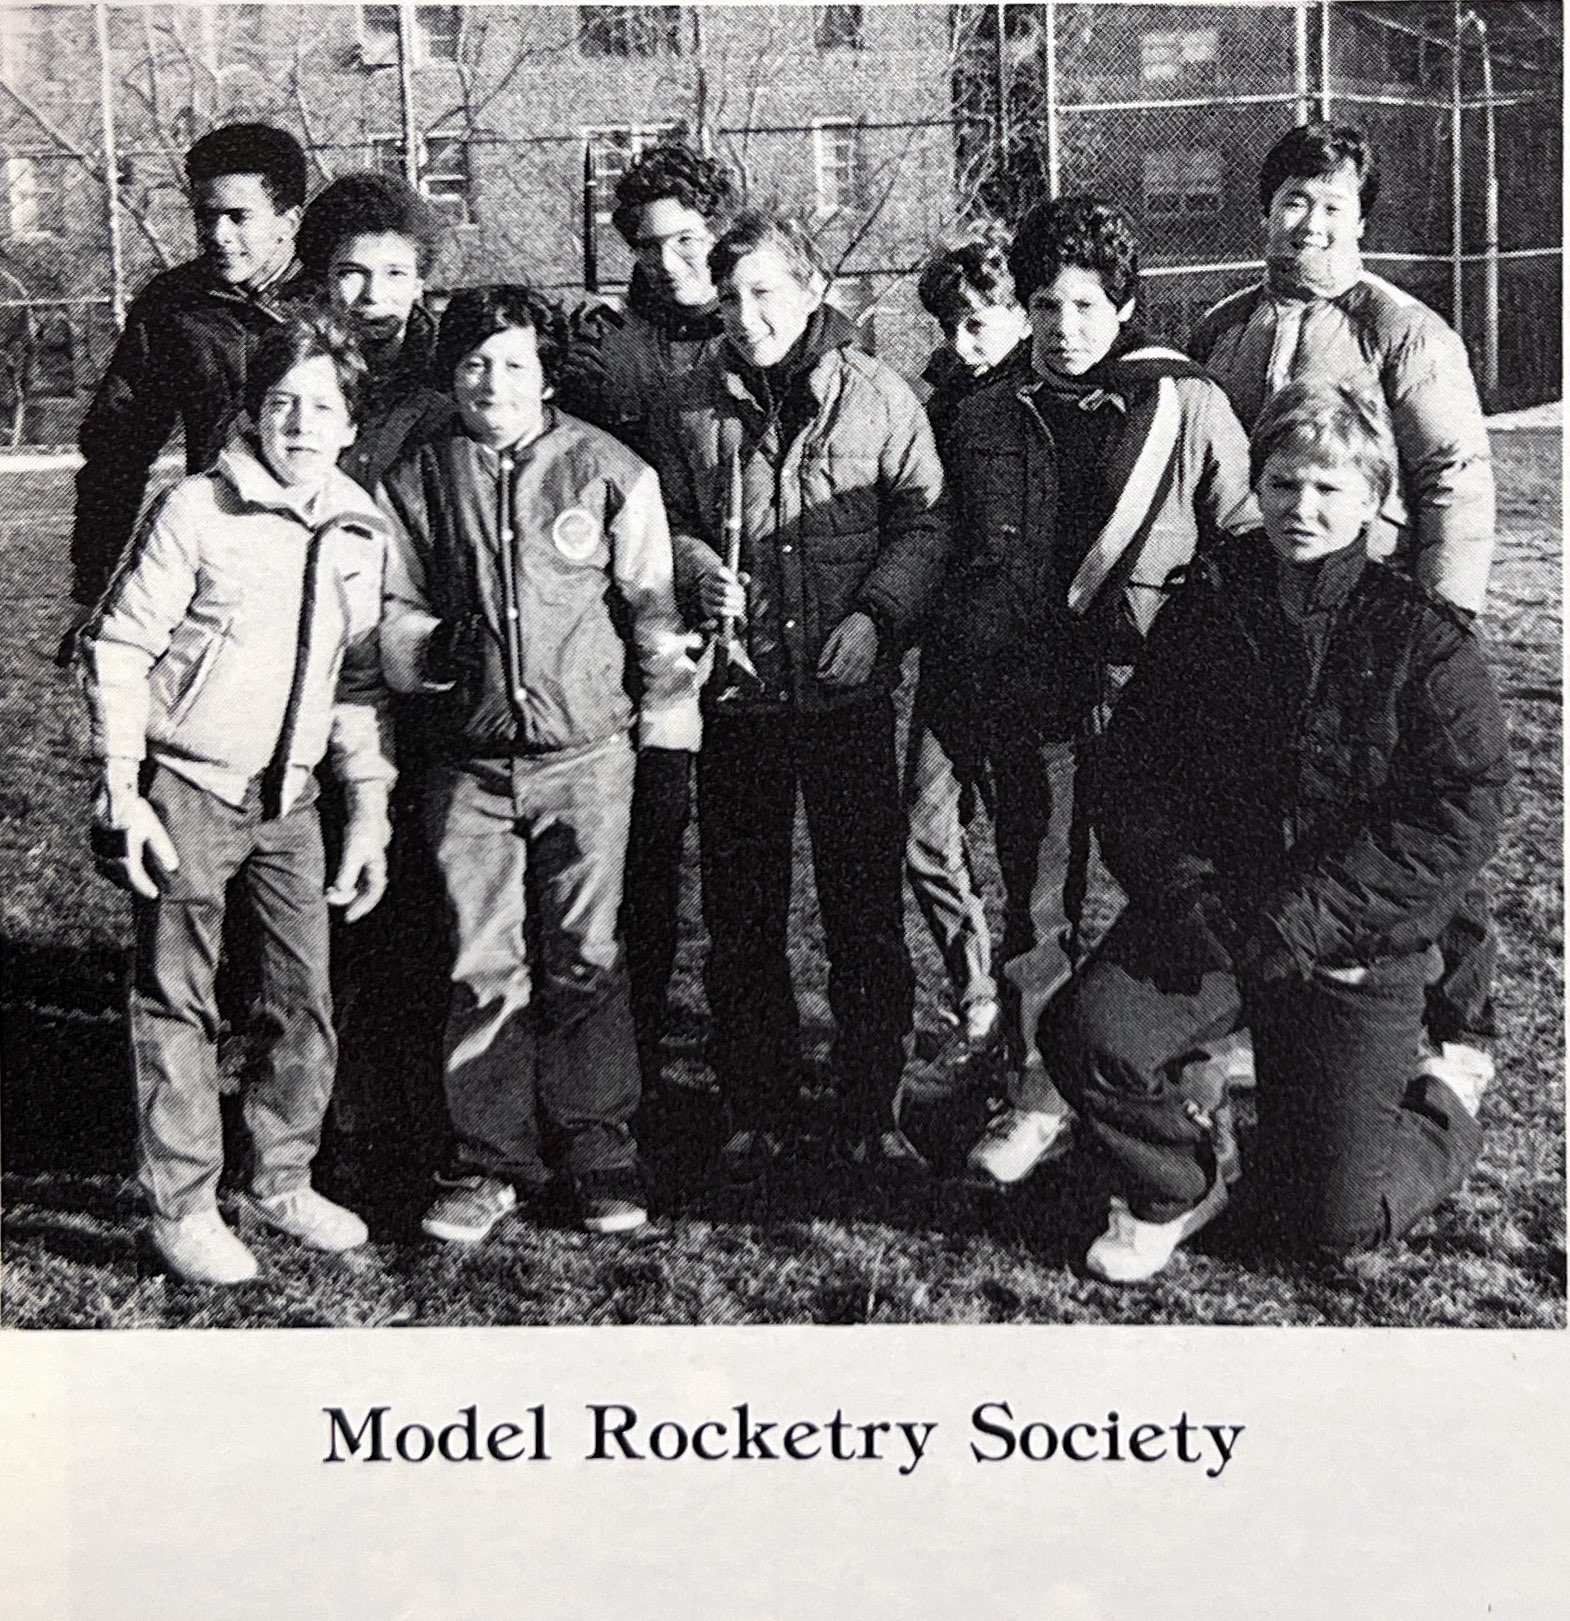 A scanned black-and-white photo from a yearbook shows a group of students posting together, with one student holding a small model rocket. Under the photo is the caption 